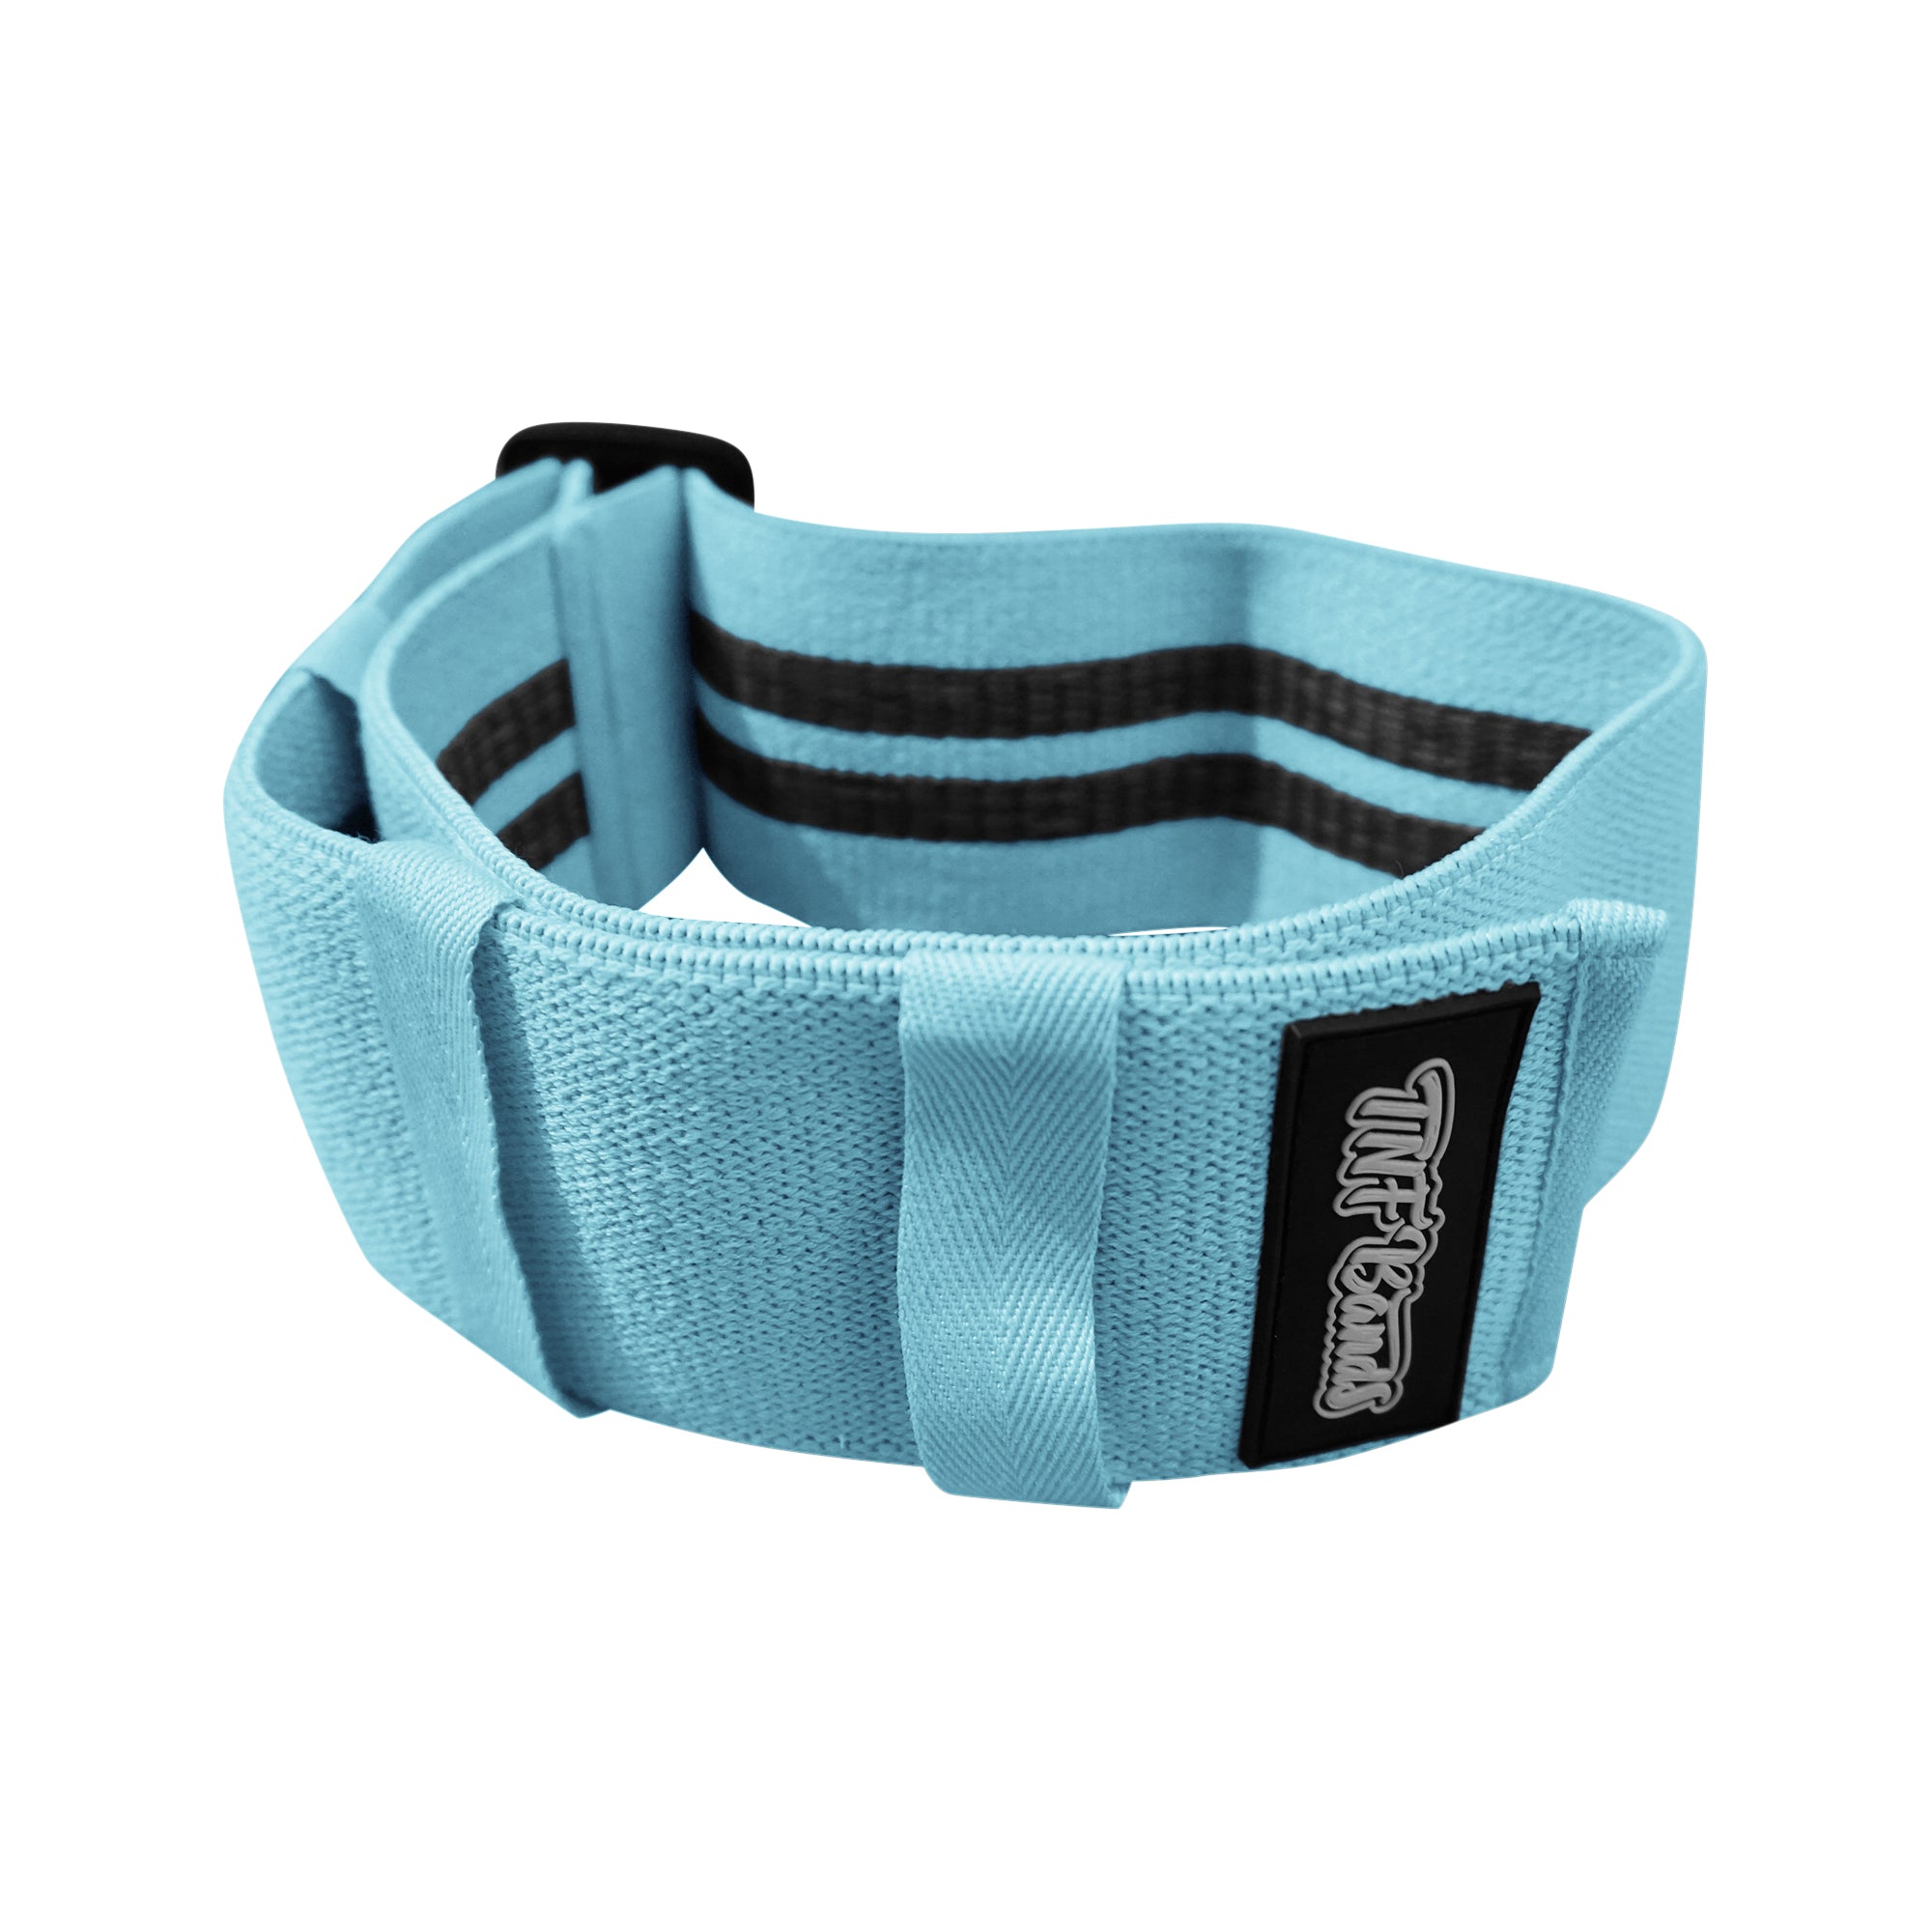 TNF Bands Adjustable Resistance Band (1 band) Fitness Accessories Blue TNF Bands